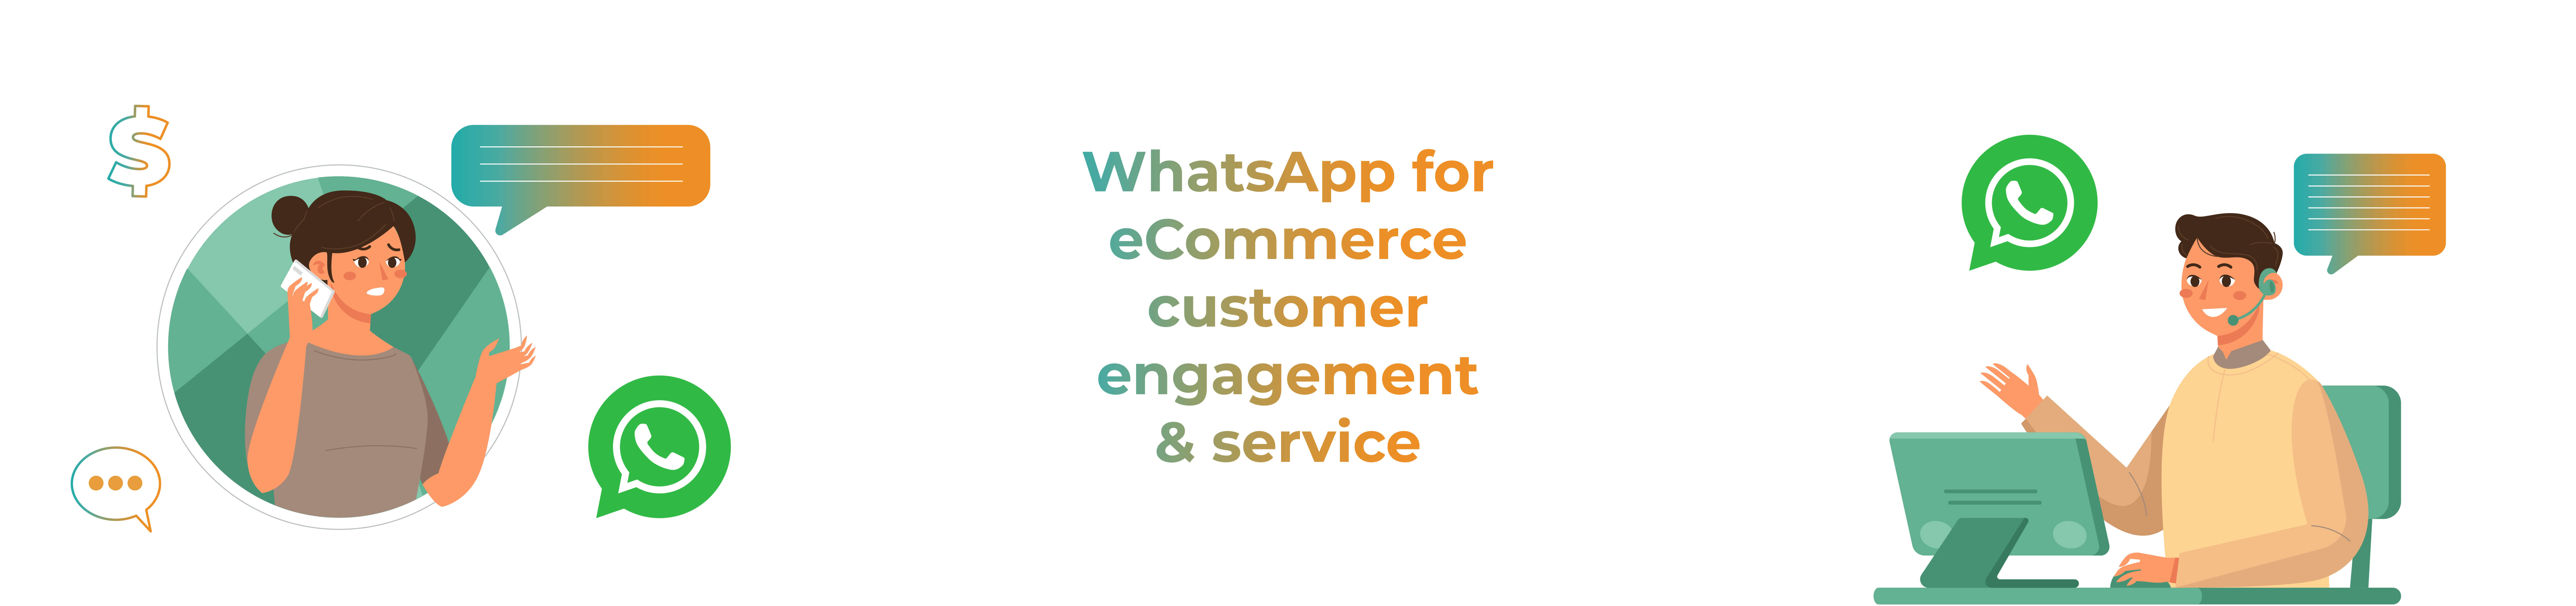 Img : WhatsApp for eCommerce customer engagement and service